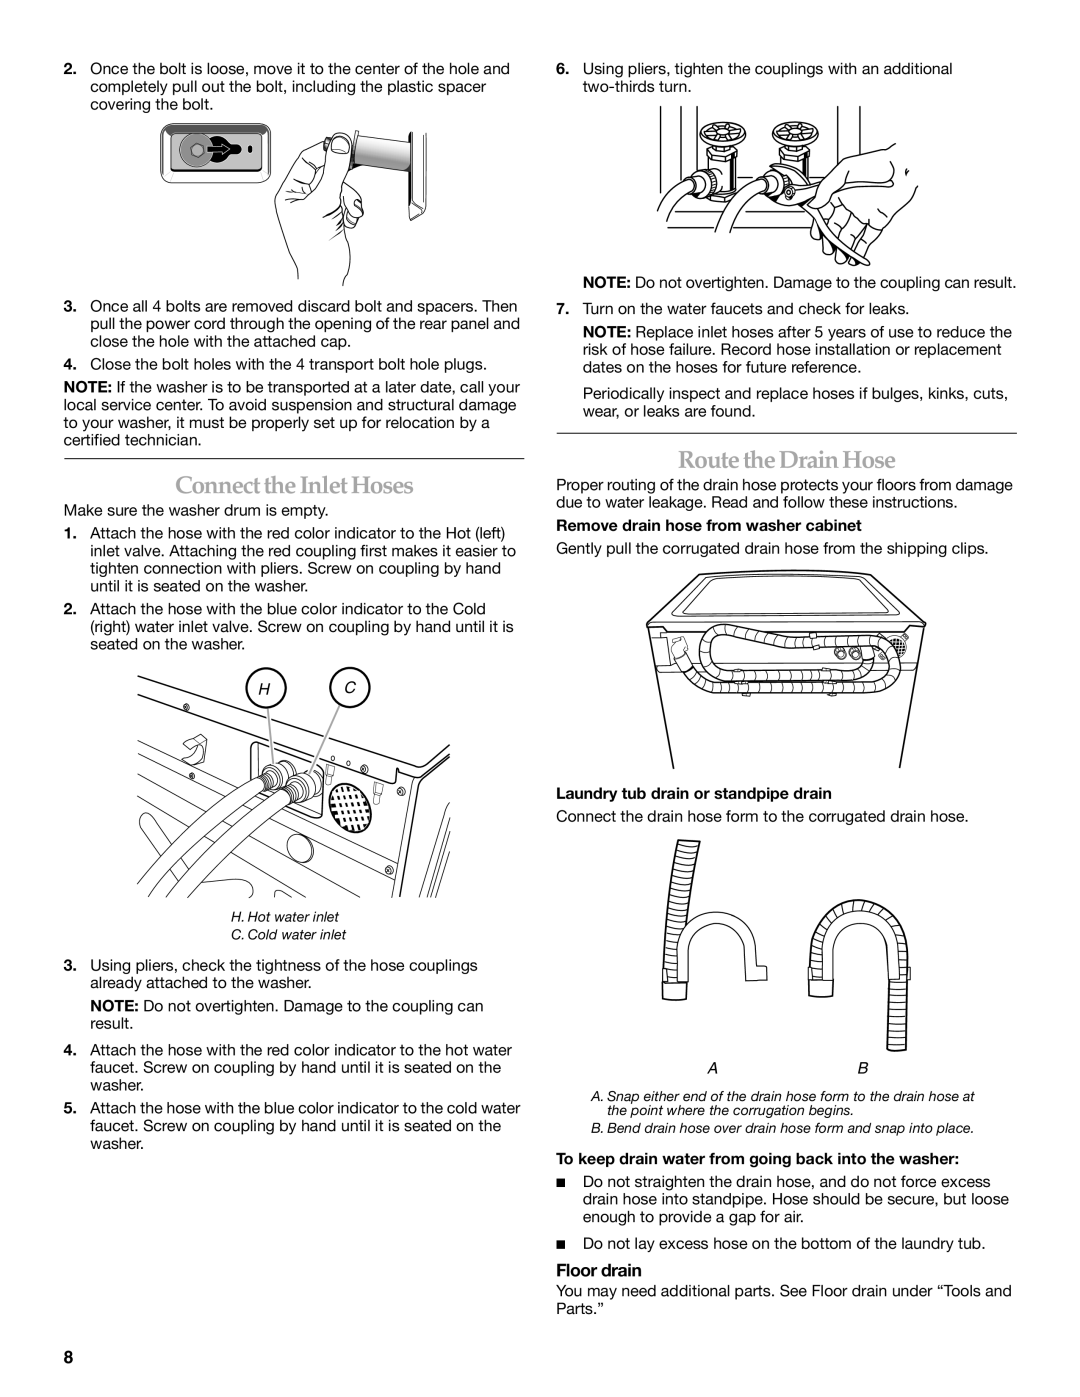 Maytag 8182969 manual Connect the Inlet Hoses, Route the Drain Hose, Floor drain 